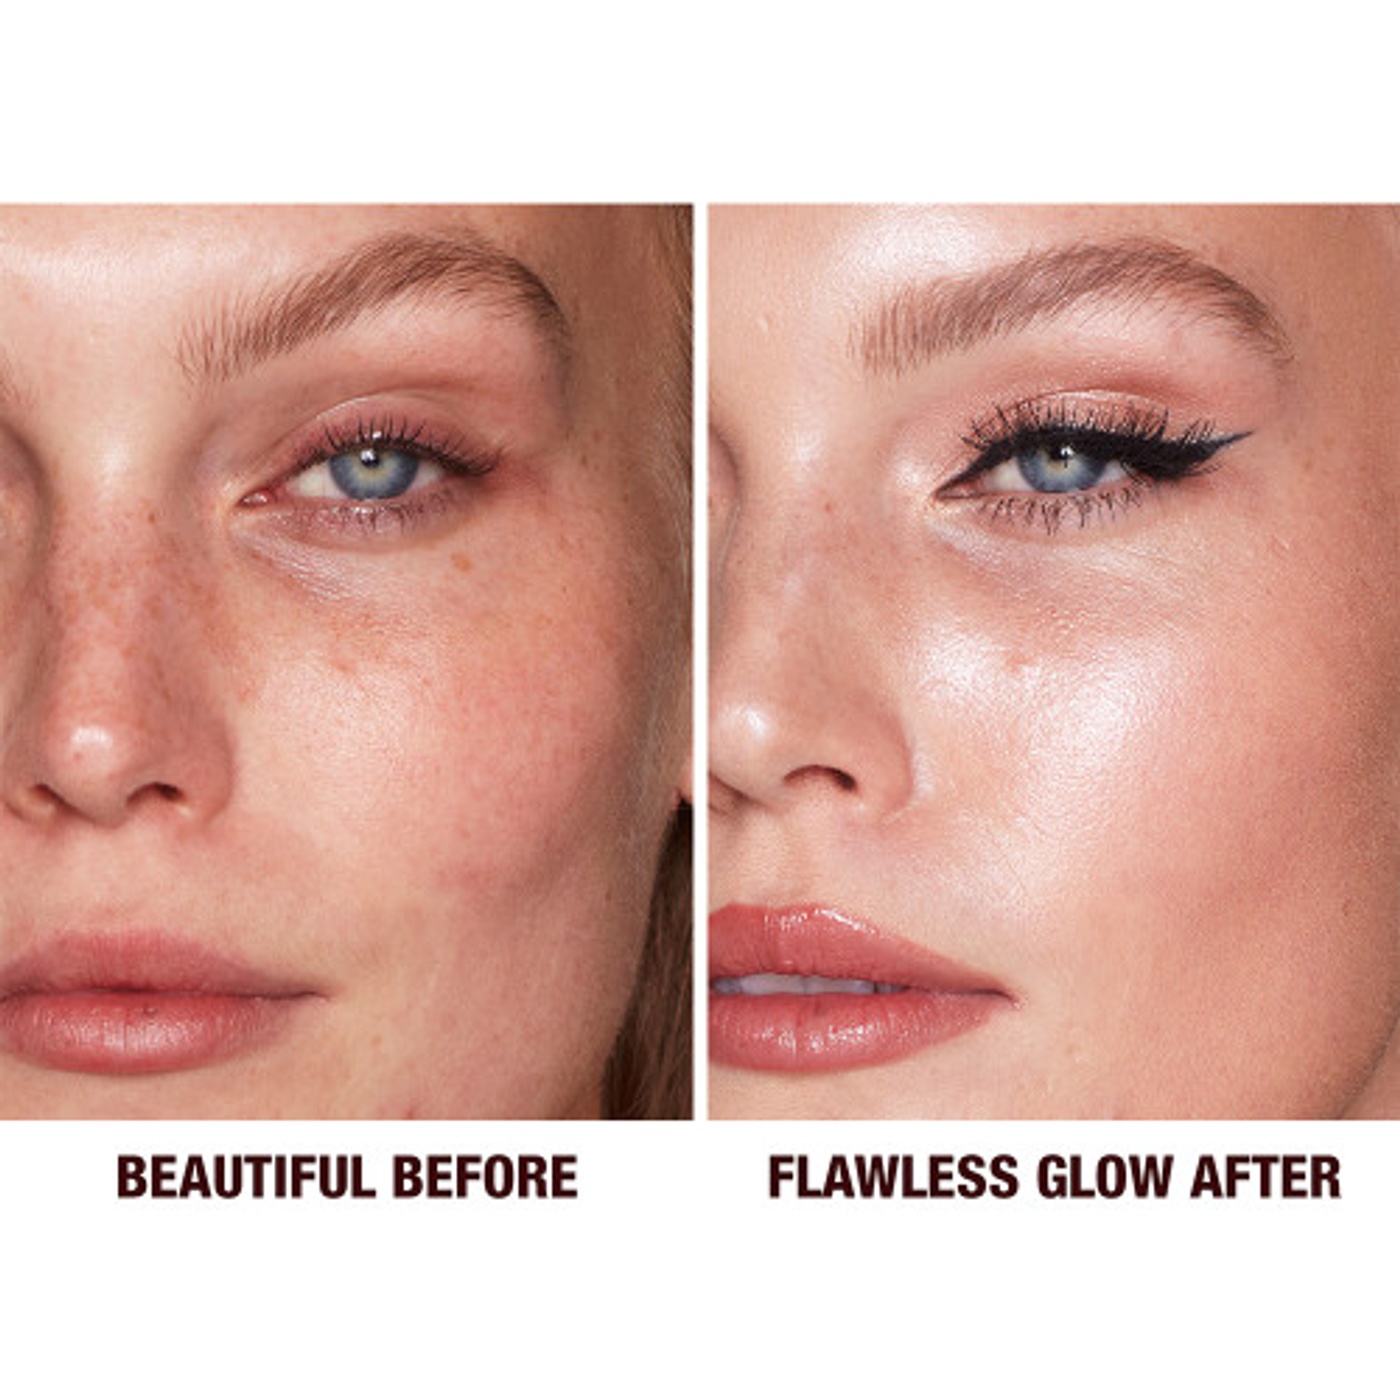 charlotte tilbury hollywood flawless filter